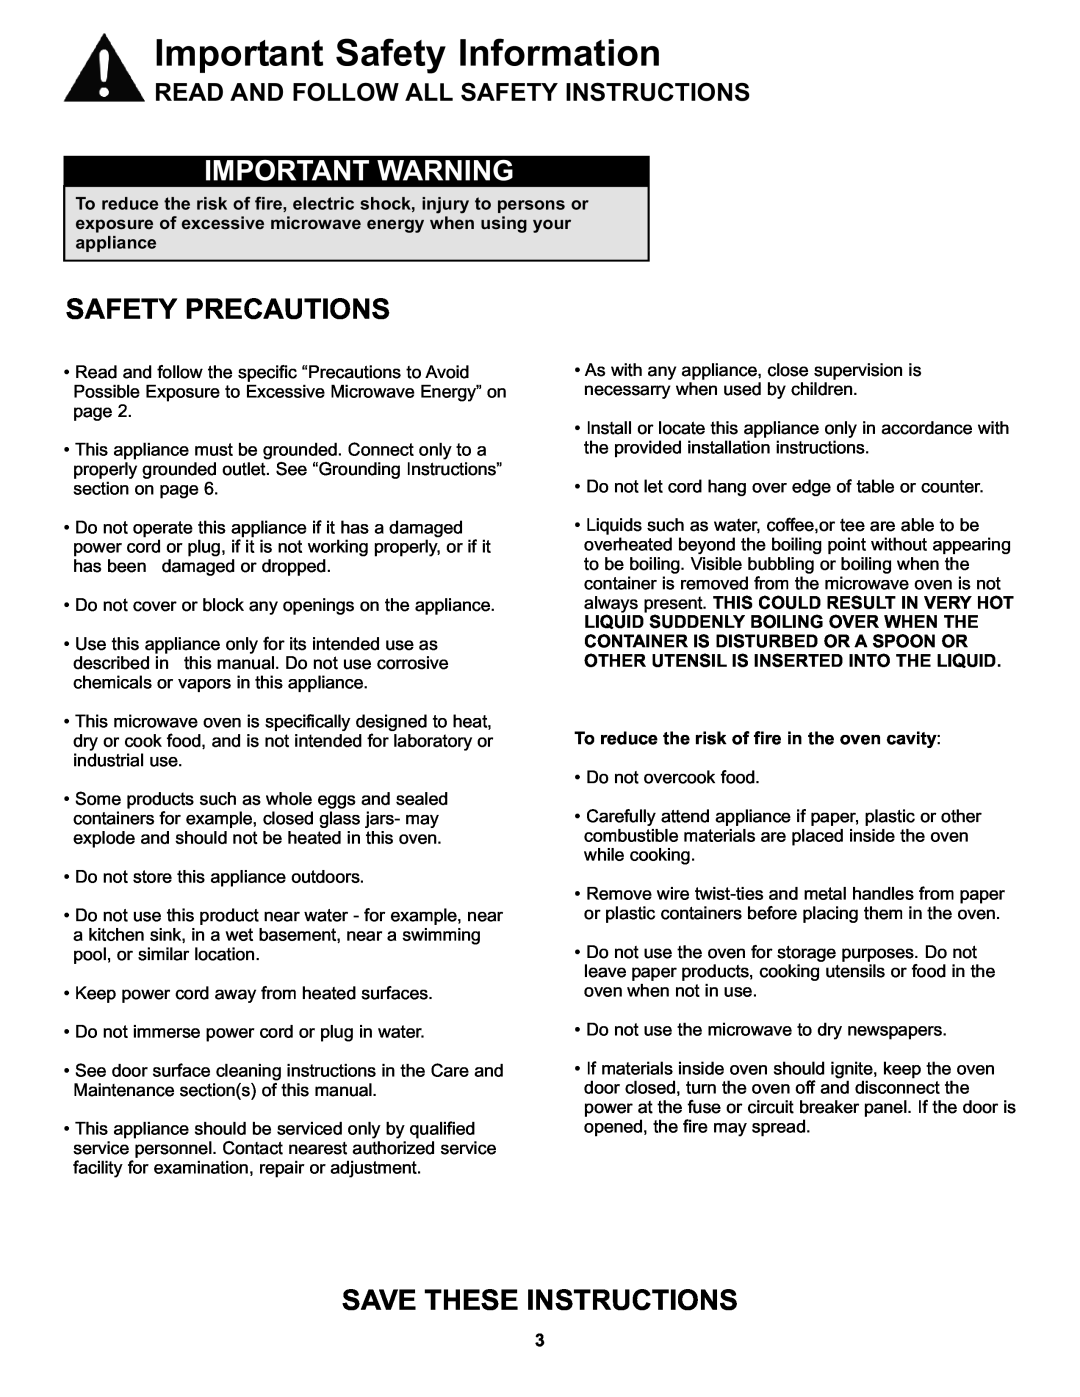 Danby DMW7700WDB manual Important Warning, Safety Precautions, Important Safety Information, Save These Instructions 